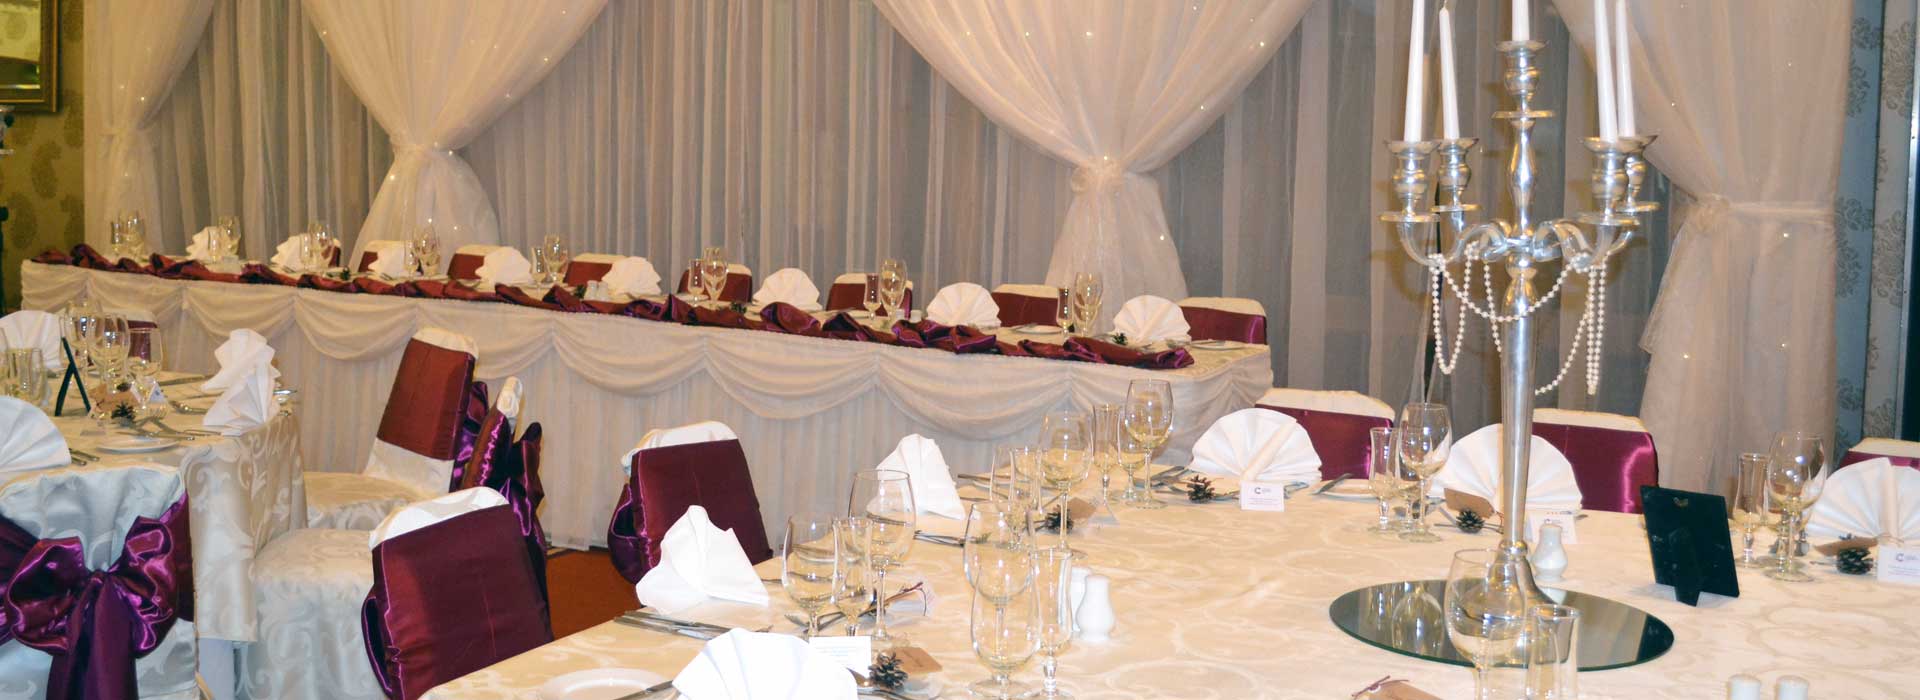 chair covers ireland black and gold lounge ideas